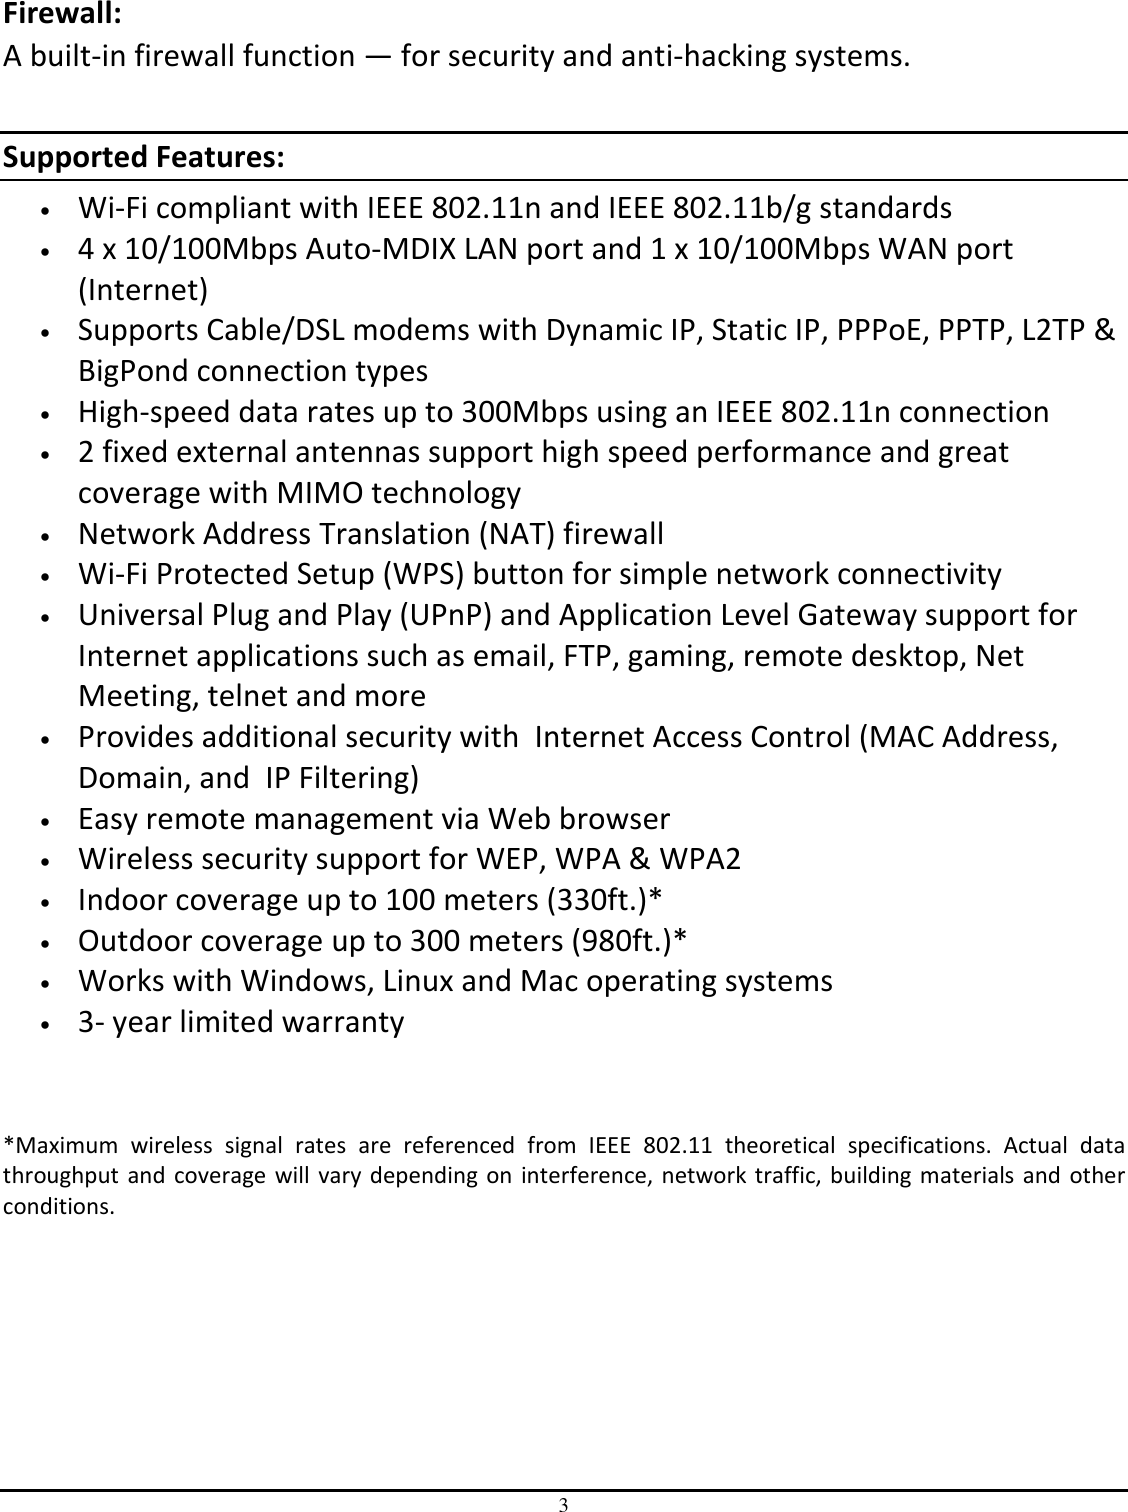 3  Firewall:  A built-in firewall function — for security and anti-hacking systems.  Supported Features: • Wi-Fi compliant with IEEE 802.11n and IEEE 802.11b/g standards • 4 x 10/100Mbps Auto-MDIX LAN port and 1 x 10/100Mbps WAN port (Internet) • Supports Cable/DSL modems with Dynamic IP, Static IP, PPPoE, PPTP, L2TP &amp; BigPond connection types • High-speed data rates up to 300Mbps using an IEEE 802.11n connection • 2 fixed external antennas support high speed performance and great coverage with MIMO technology • Network Address Translation (NAT) firewall • Wi-Fi Protected Setup (WPS) button for simple network connectivity • Universal Plug and Play (UPnP) and Application Level Gateway support for Internet applications such as email, FTP, gaming, remote desktop, Net Meeting, telnet and more • Provides additional security with  Internet Access Control (MAC Address, Domain, and  IP Filtering) • Easy remote management via Web browser  • Wireless security support for WEP, WPA &amp; WPA2 • Indoor coverage up to 100 meters (330ft.)*  • Outdoor coverage up to 300 meters (980ft.)* • Works with Windows, Linux and Mac operating systems • 3- year limited warranty   *Maximum  wireless  signal  rates  are  referenced  from  IEEE  802.11  theoretical  specifications.  Actual  data throughput and coverage will vary depending on interference, network traffic, building materials and  other conditions.    